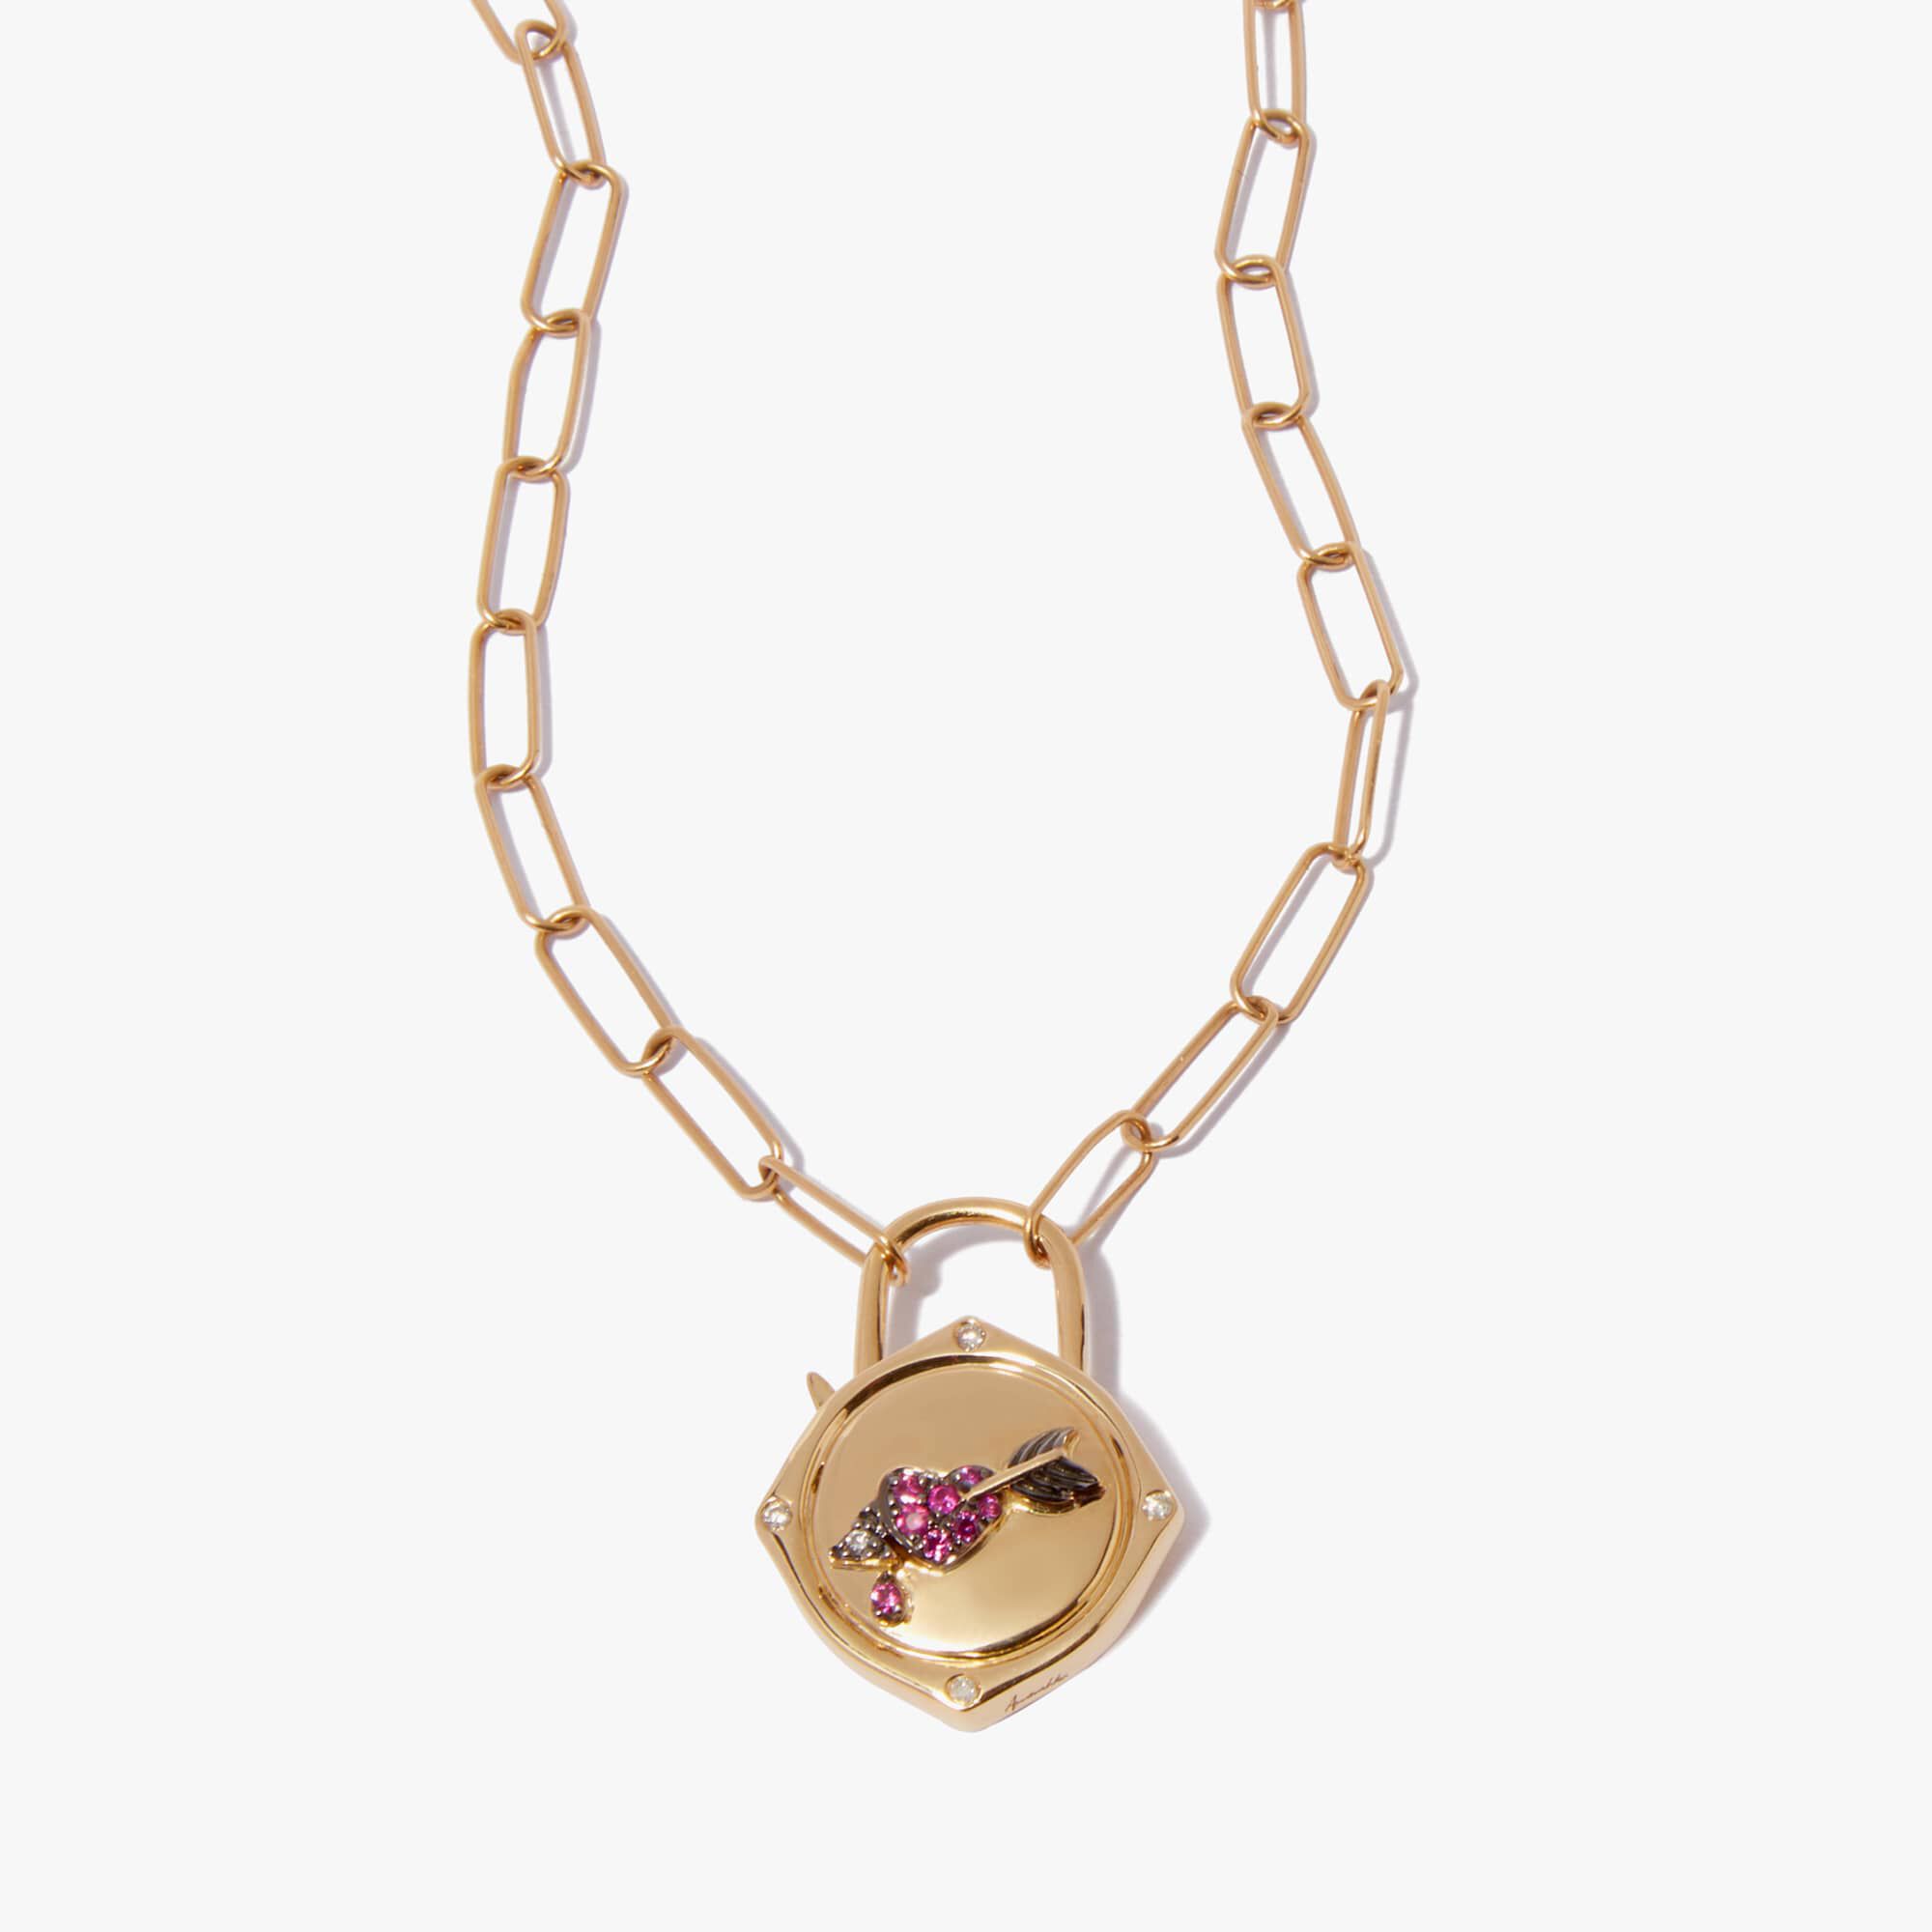 Louis Vuitton Luggage Lock Necklace-Cable Link Chain